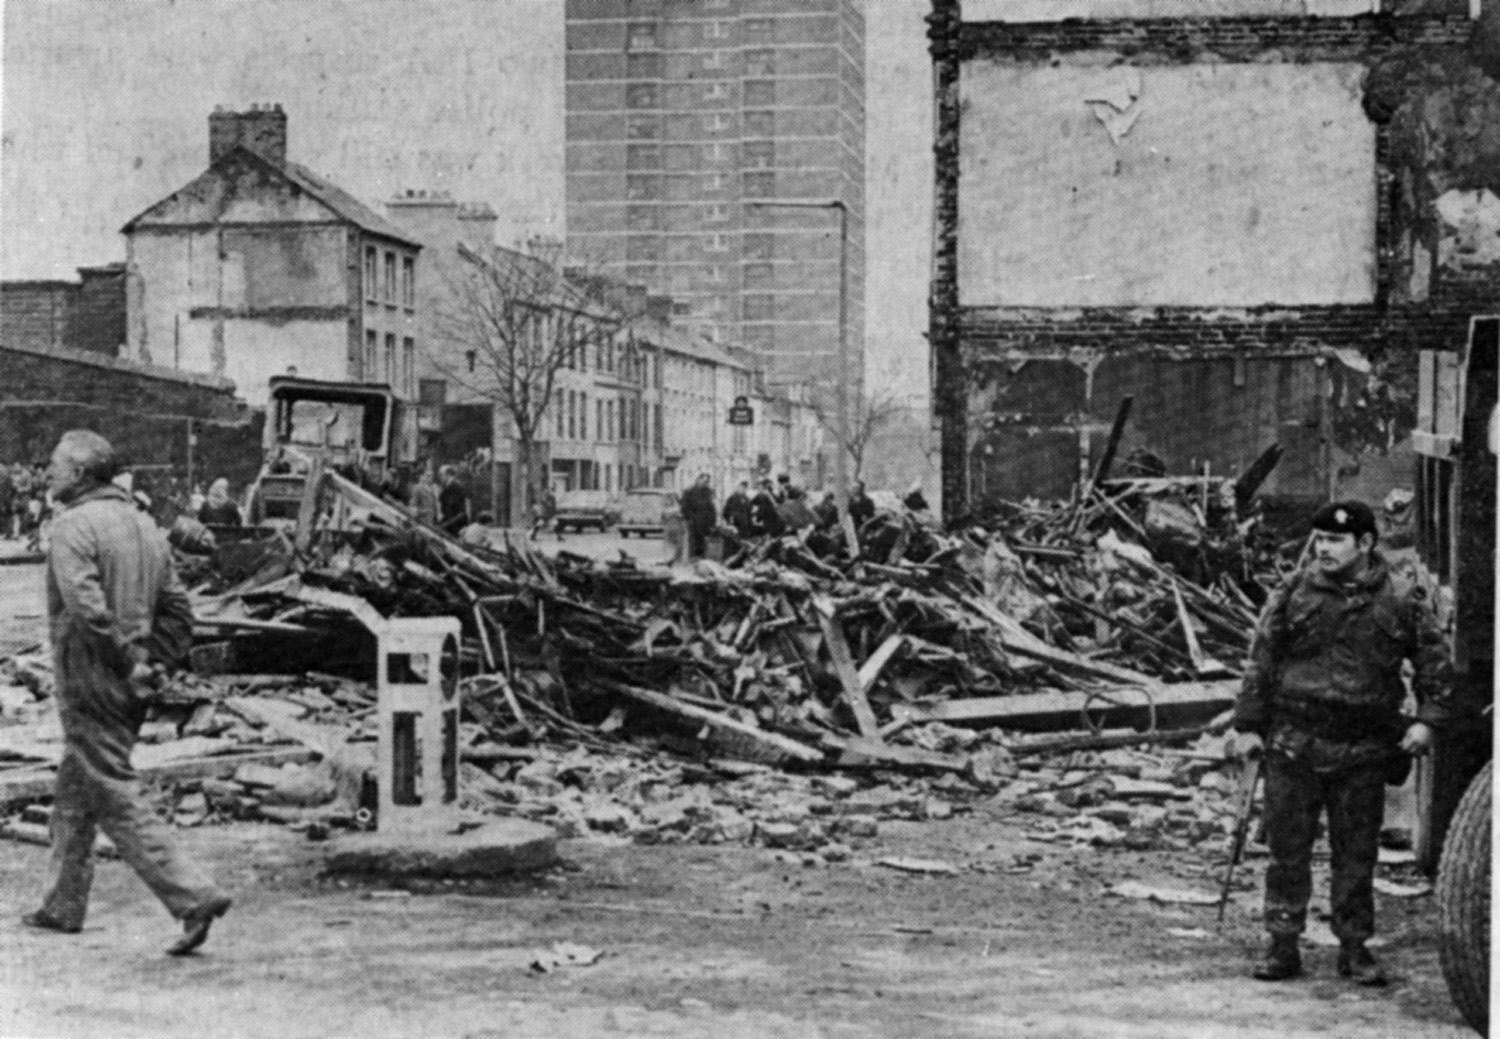 15 people, including two children were killed in the North Queen Street bar massacre on December 4 1971.